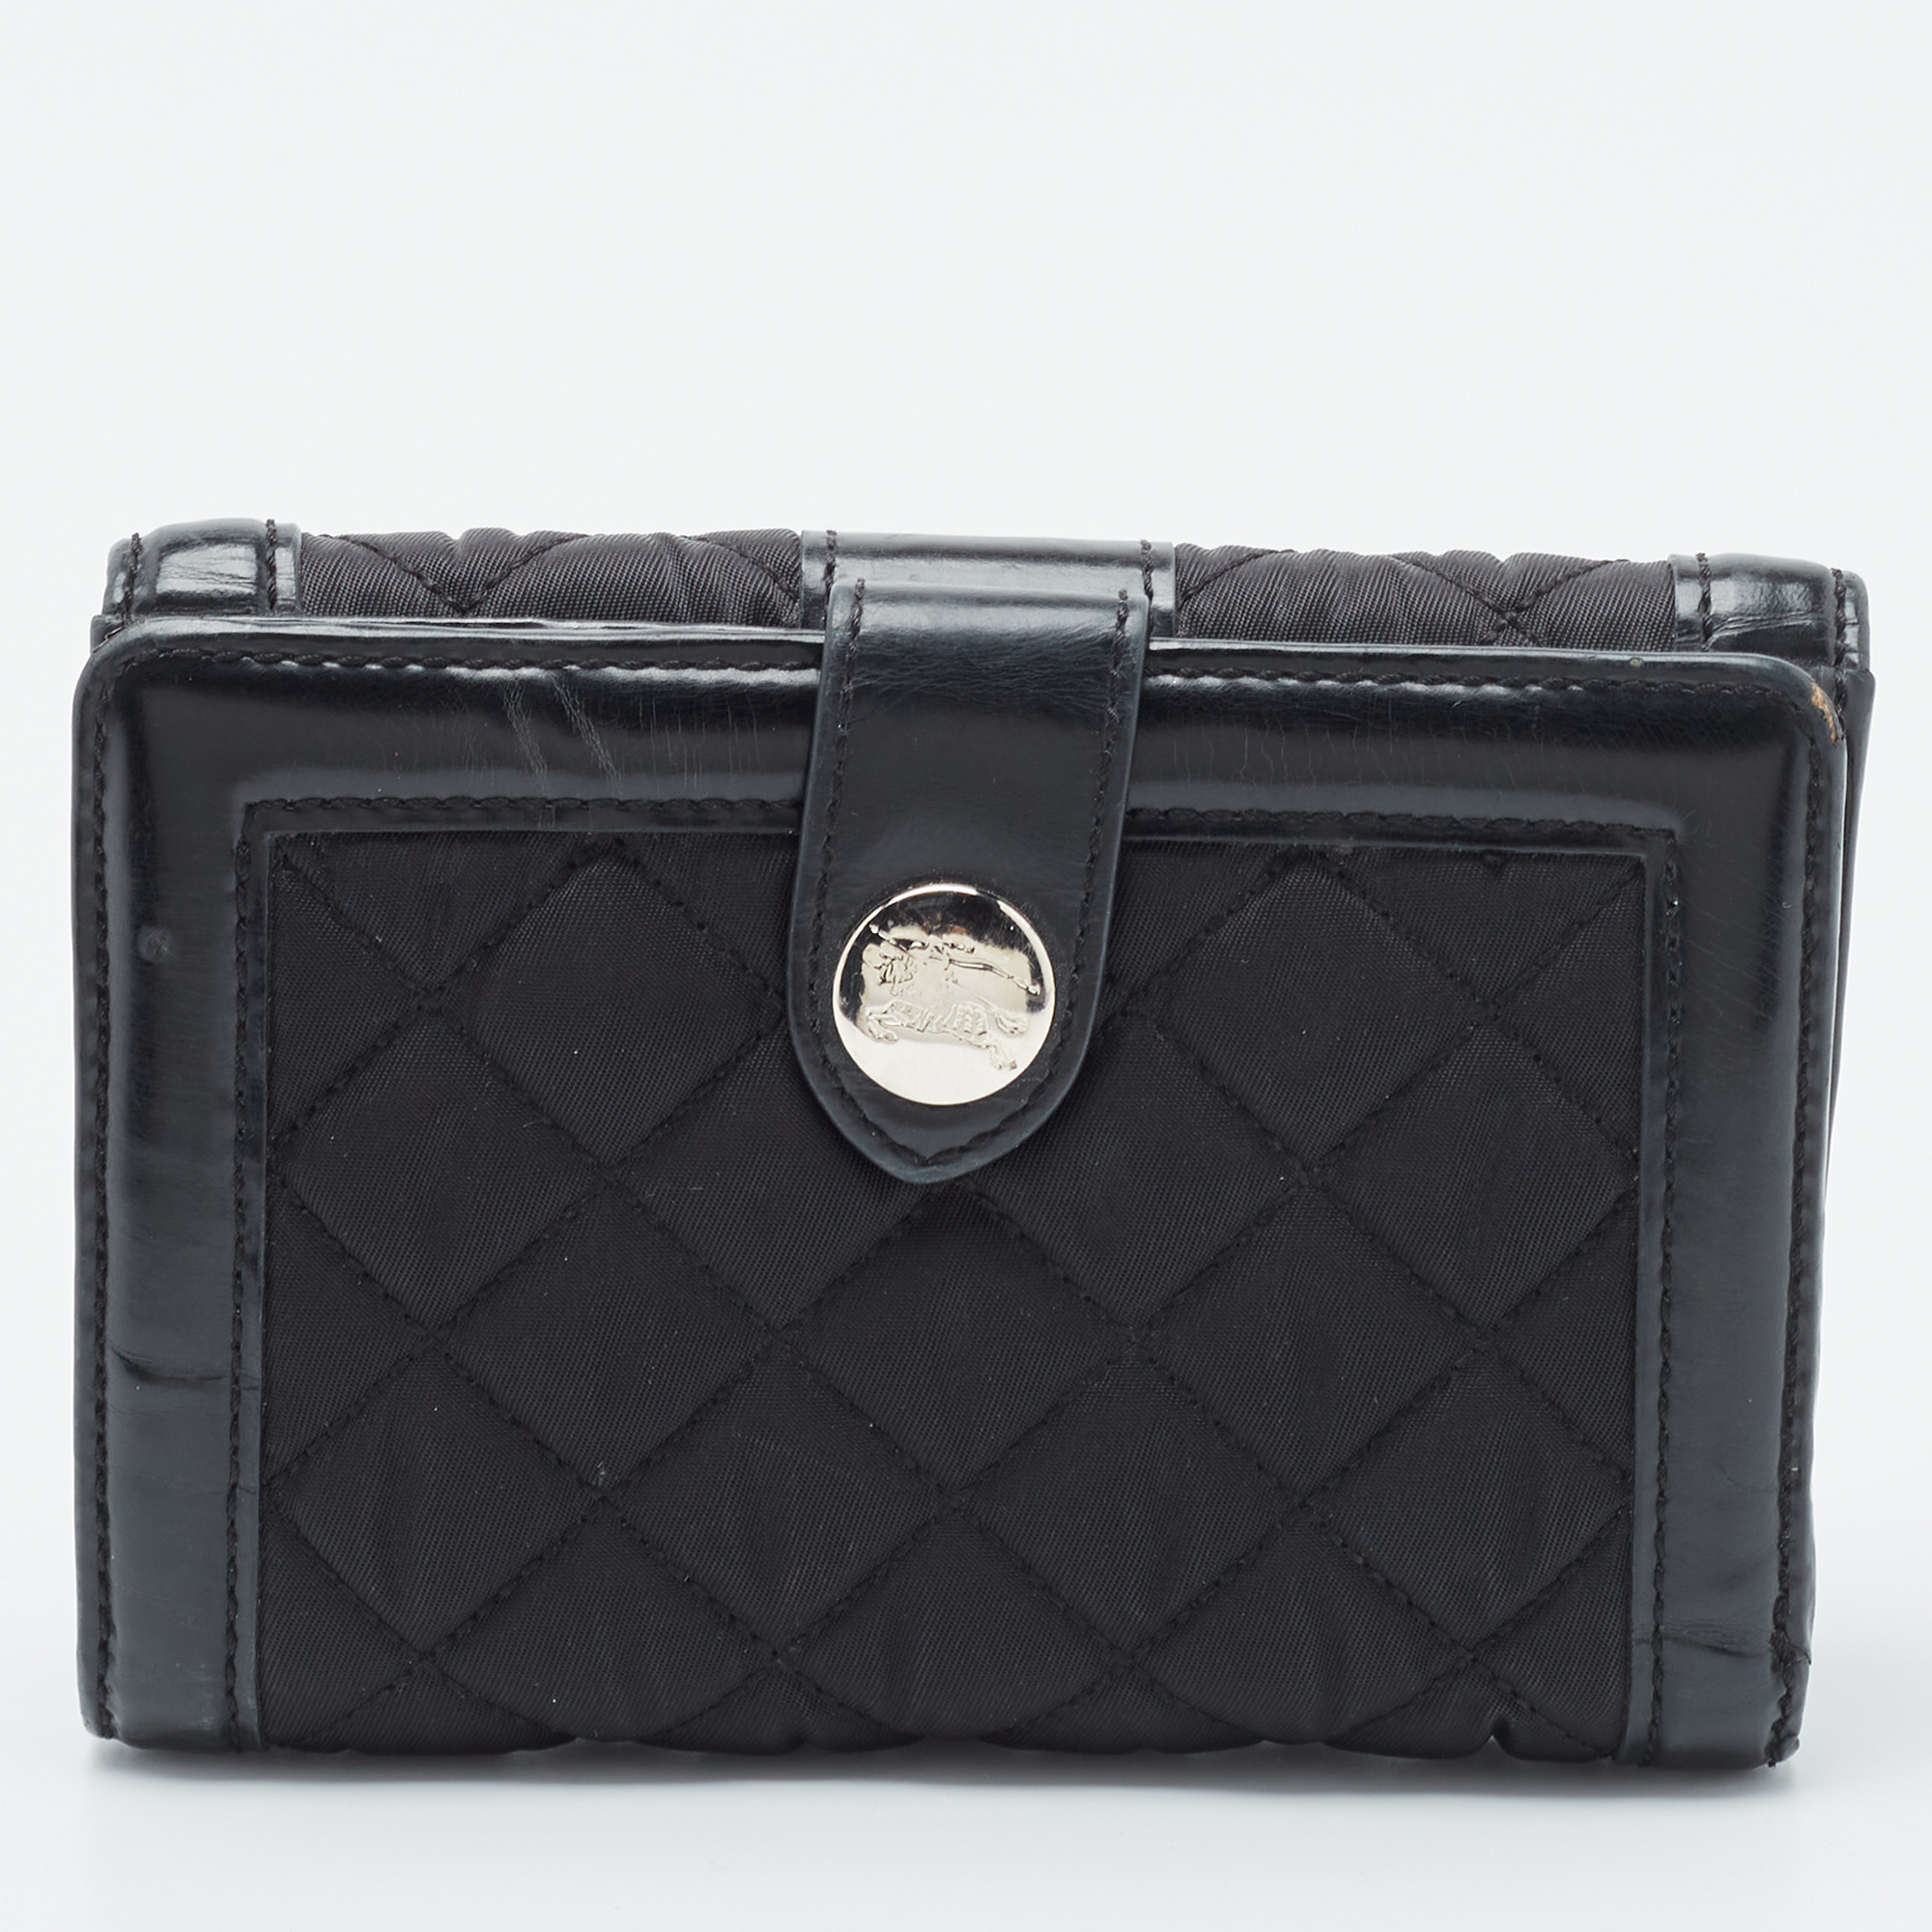 Burberry Black Nylon And Leather Compact Wallet